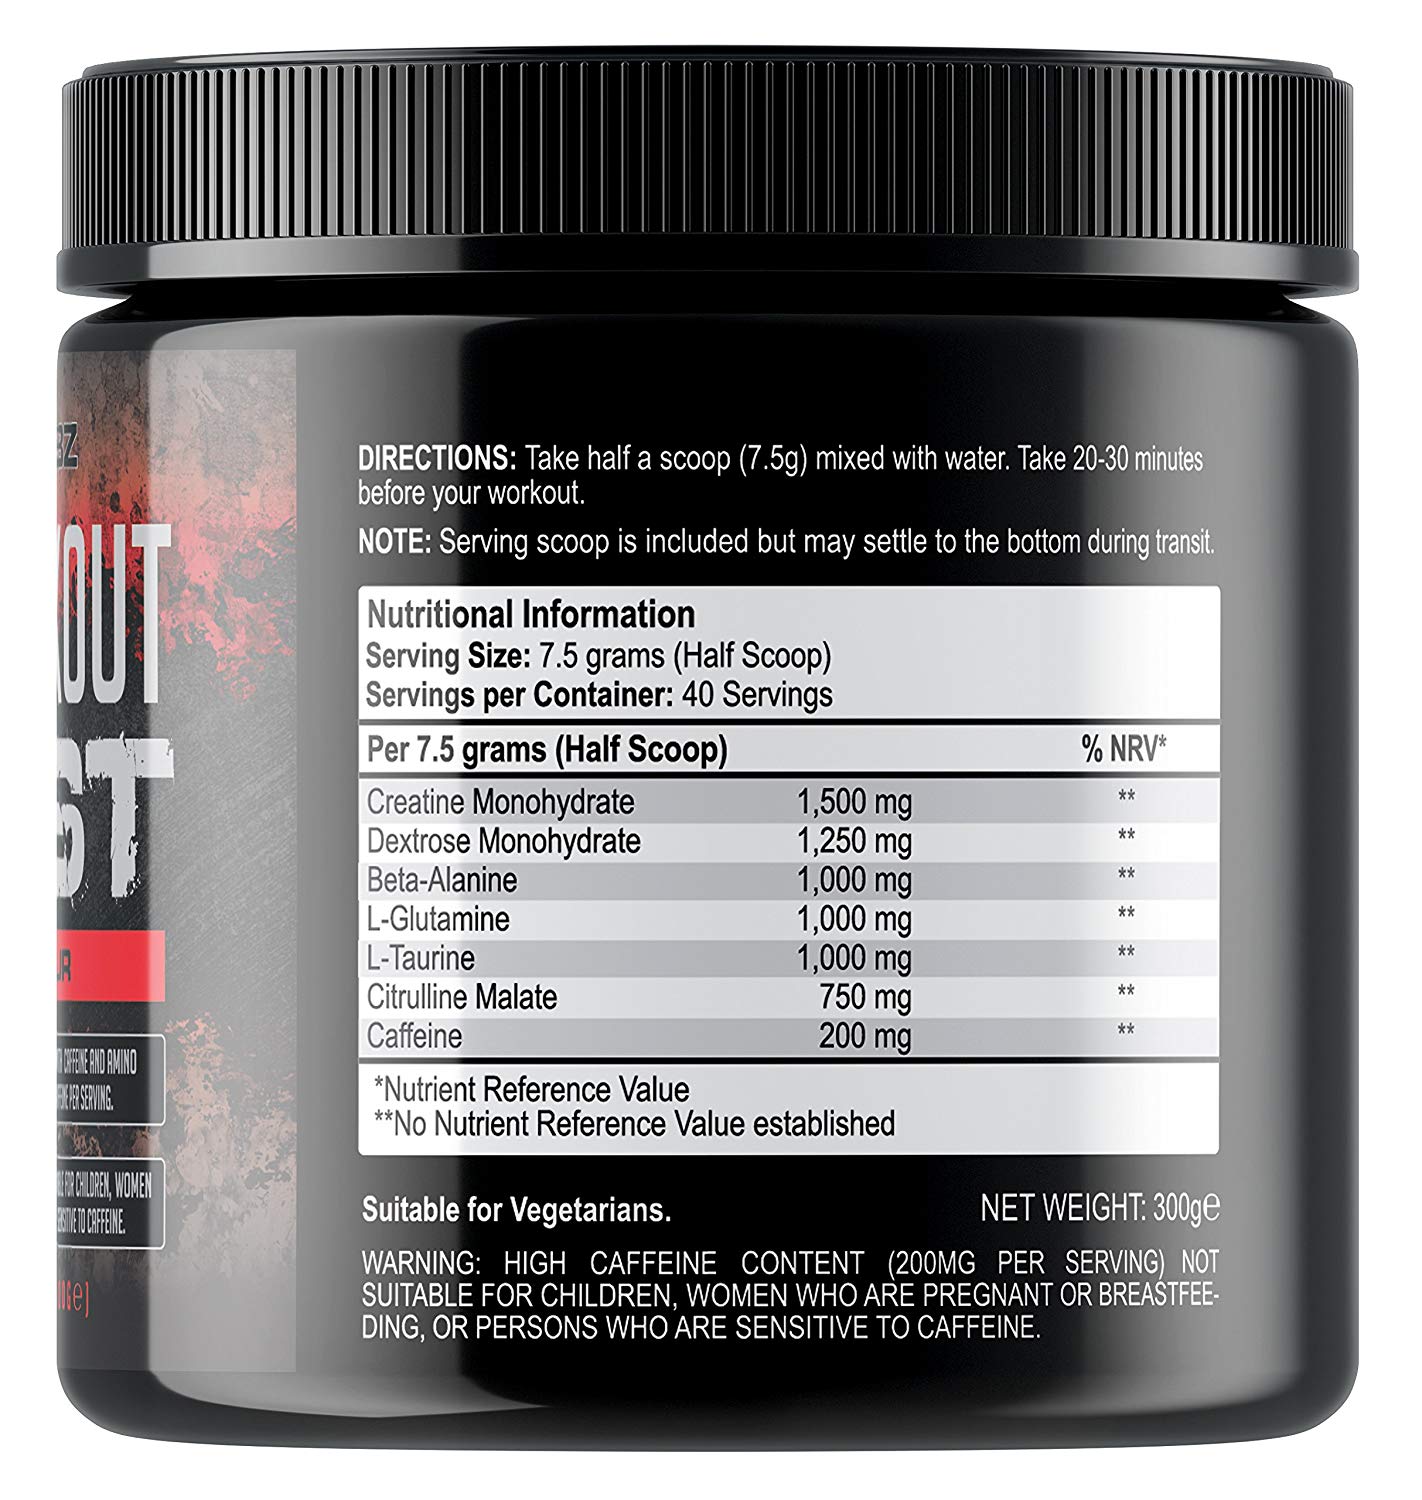  Creature pre workout for Women